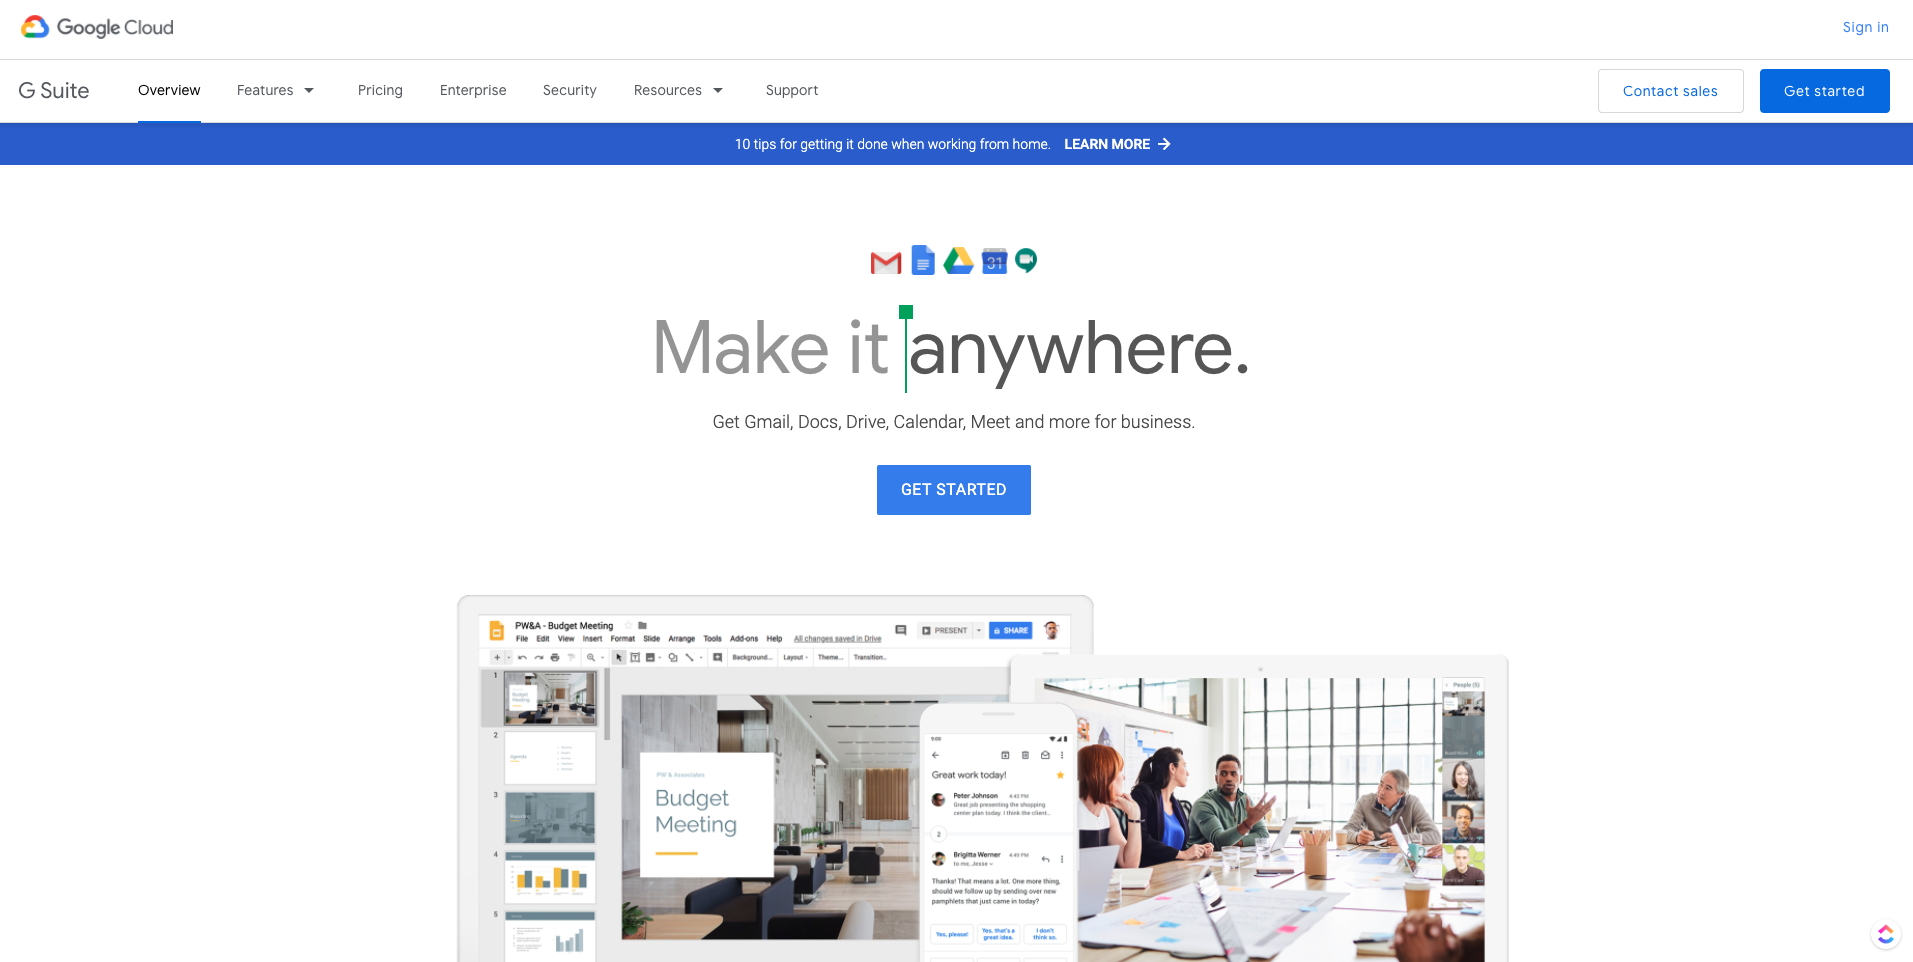 G Suite Business Productivity Tool